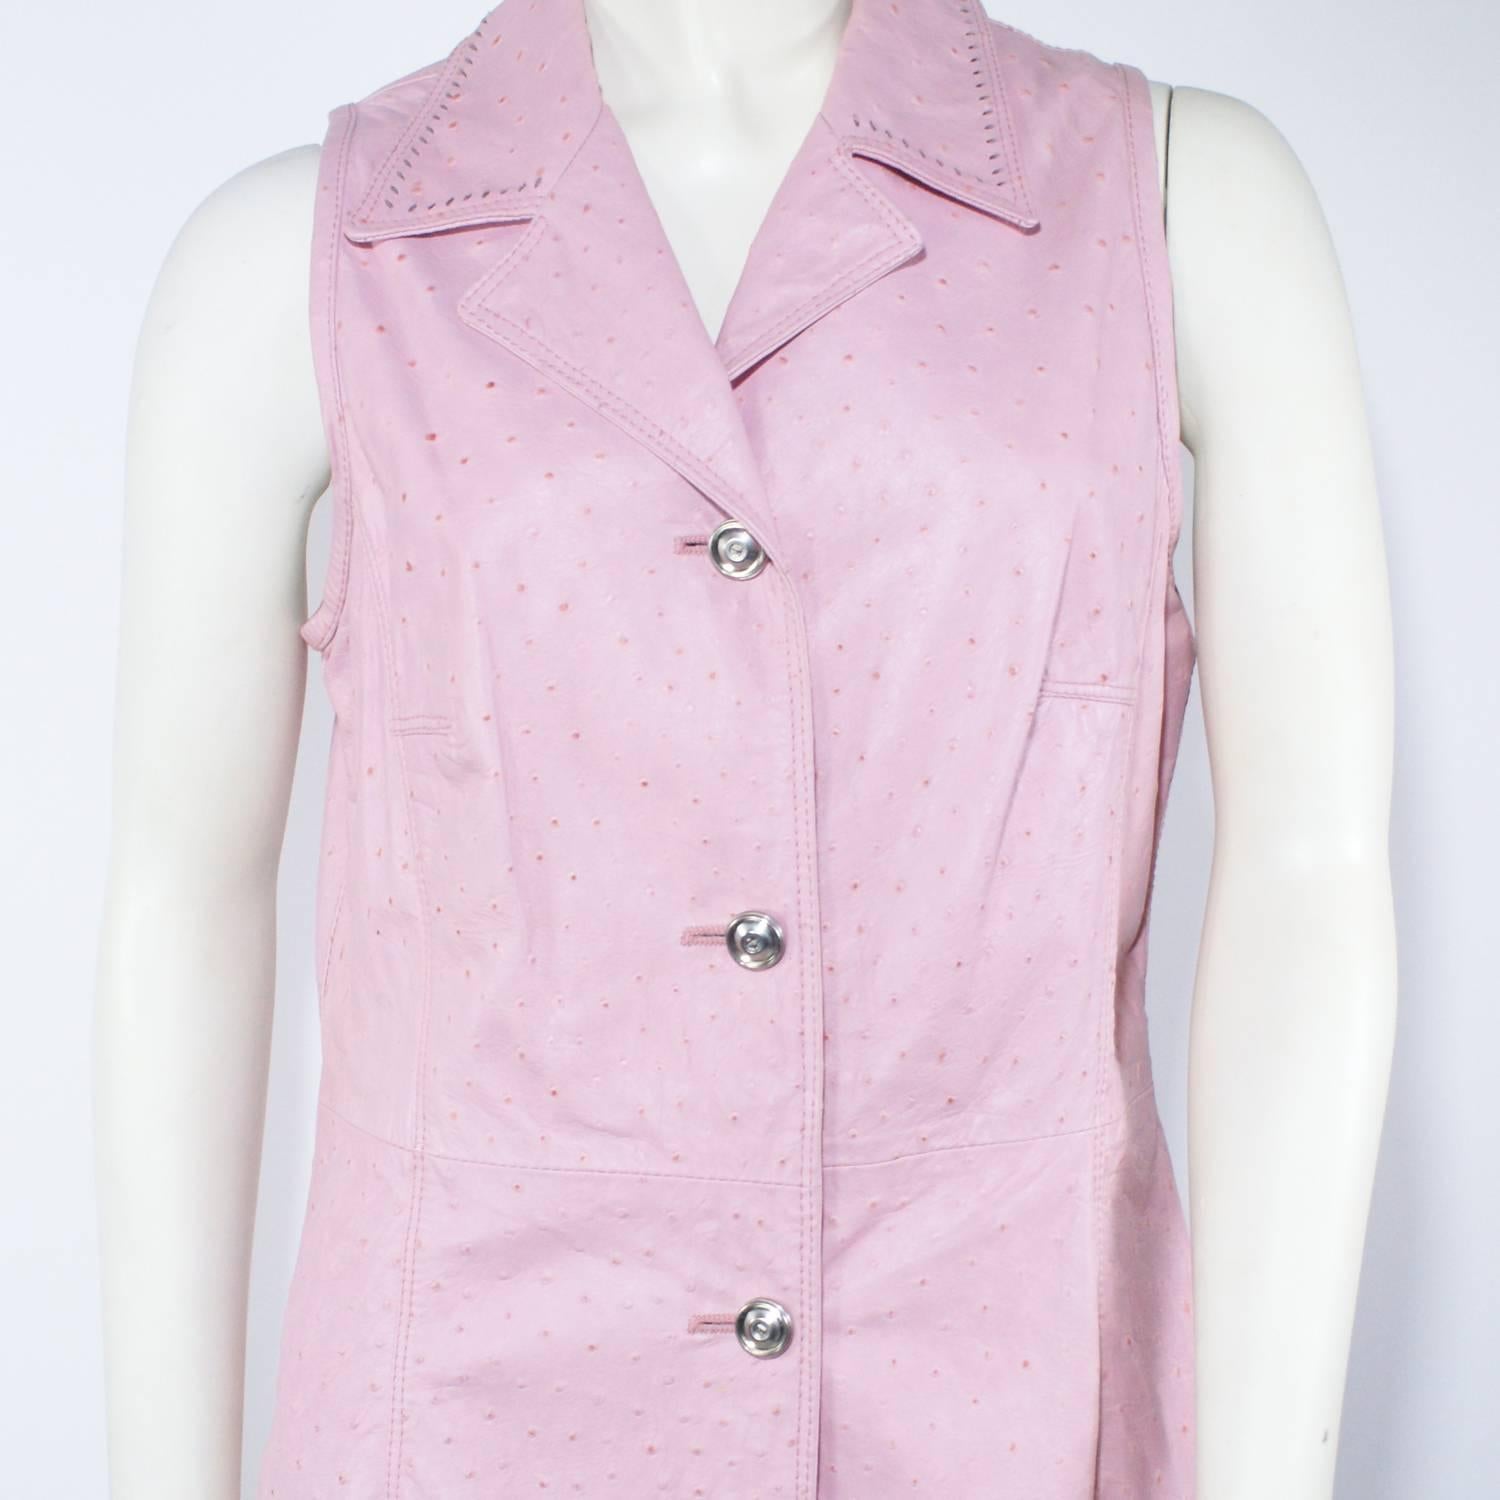 A textured pink leather vest
Silver button closure
Perforated detail at the collar
Fits like a size small  6
